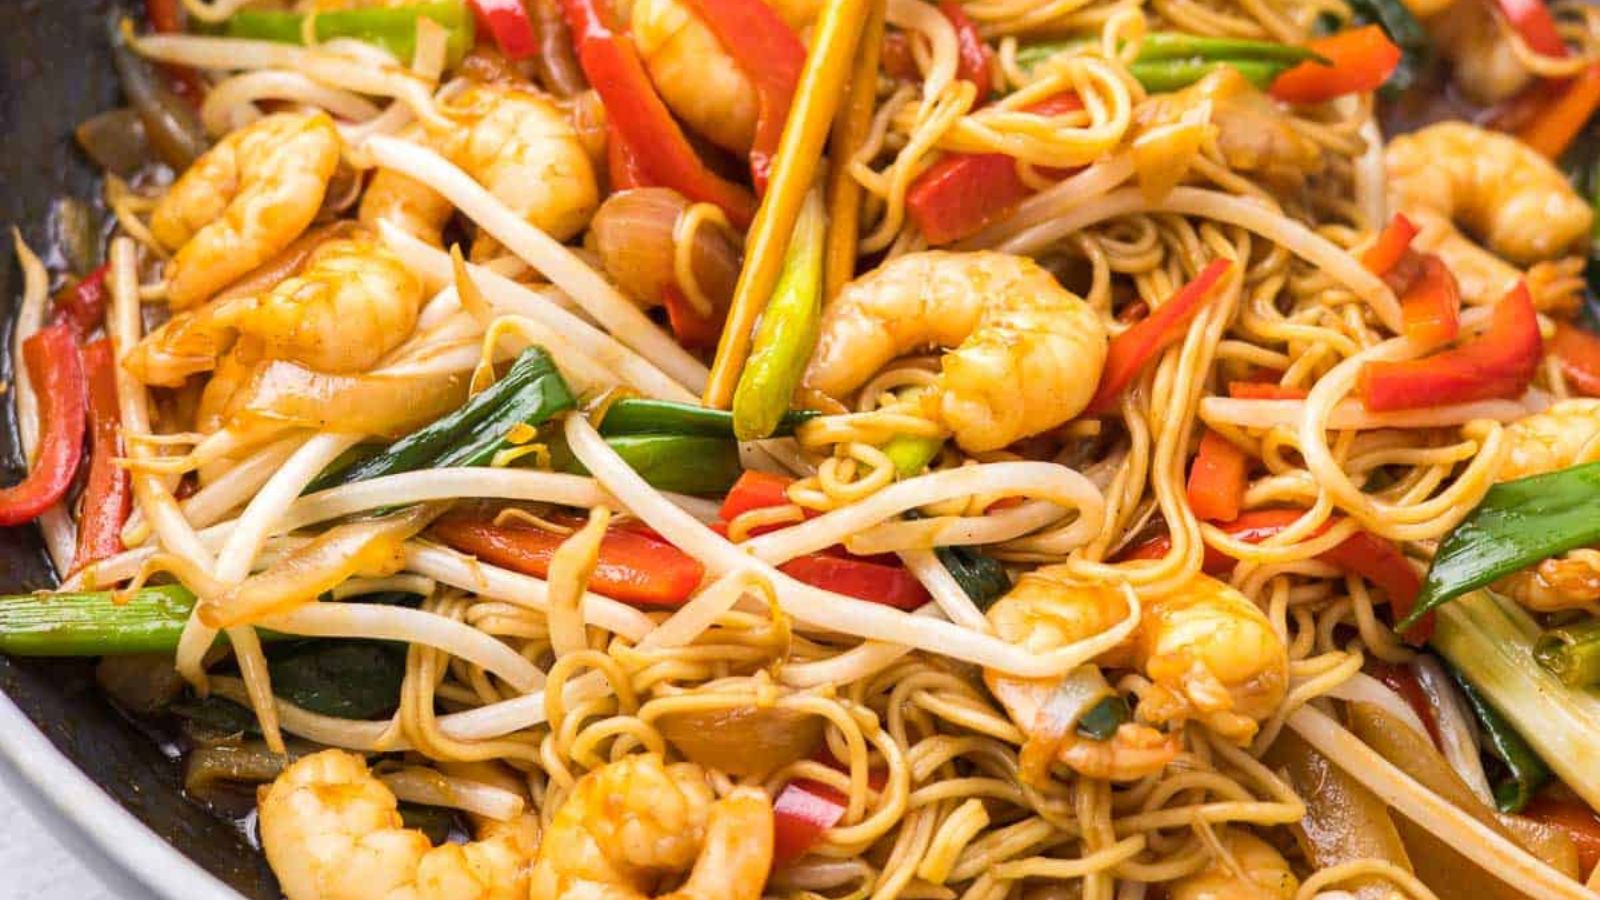 Discover 24 Asian Recipes for a Healthy Culinary Adventure